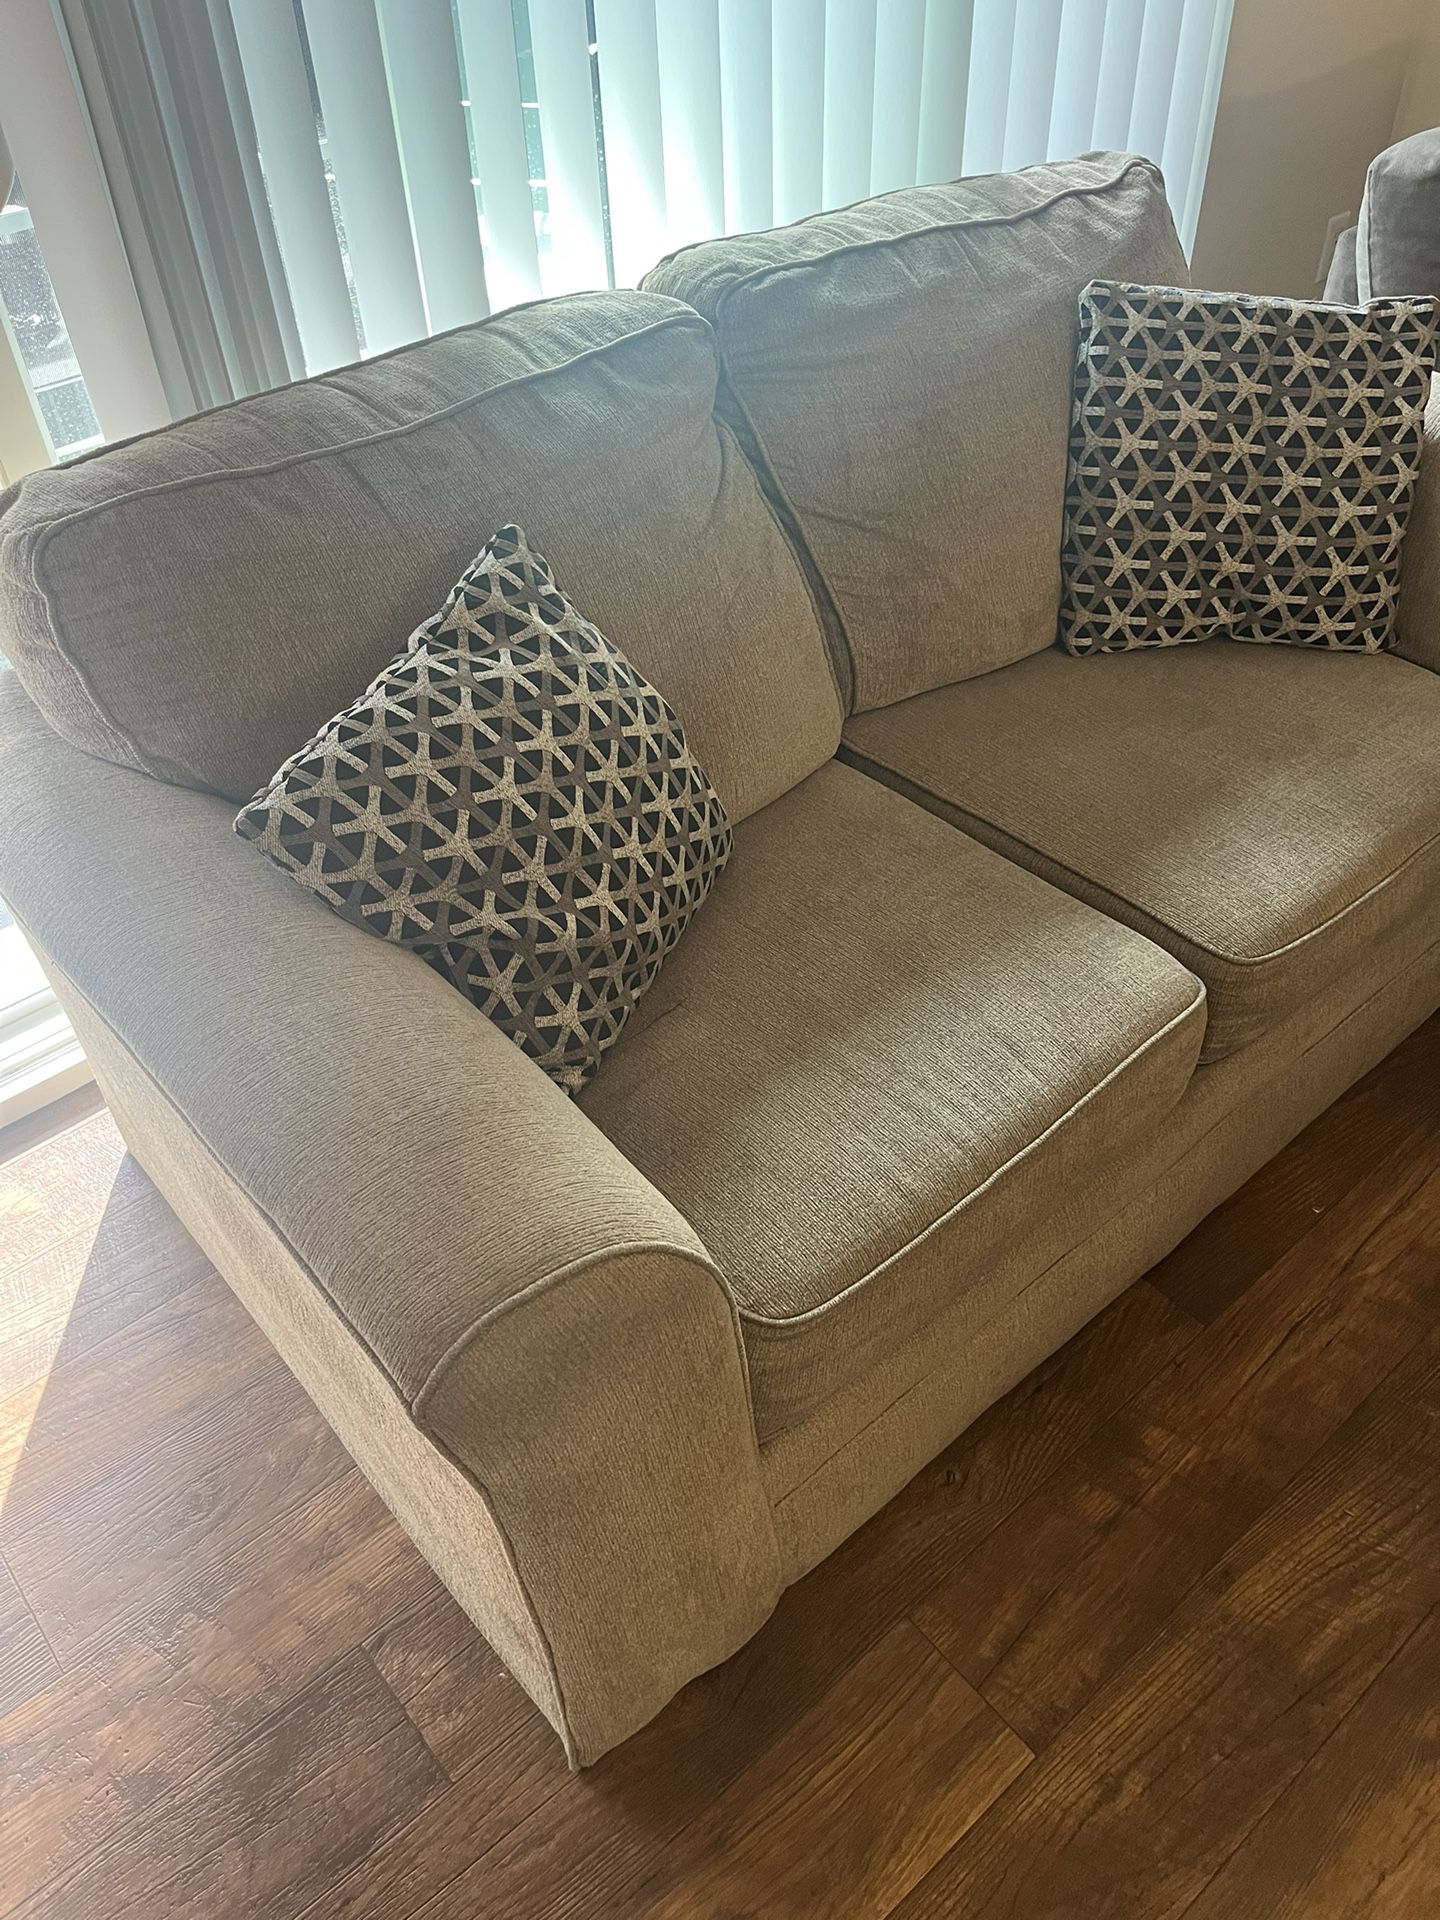 400 OBO Couch And Loveseat Set 